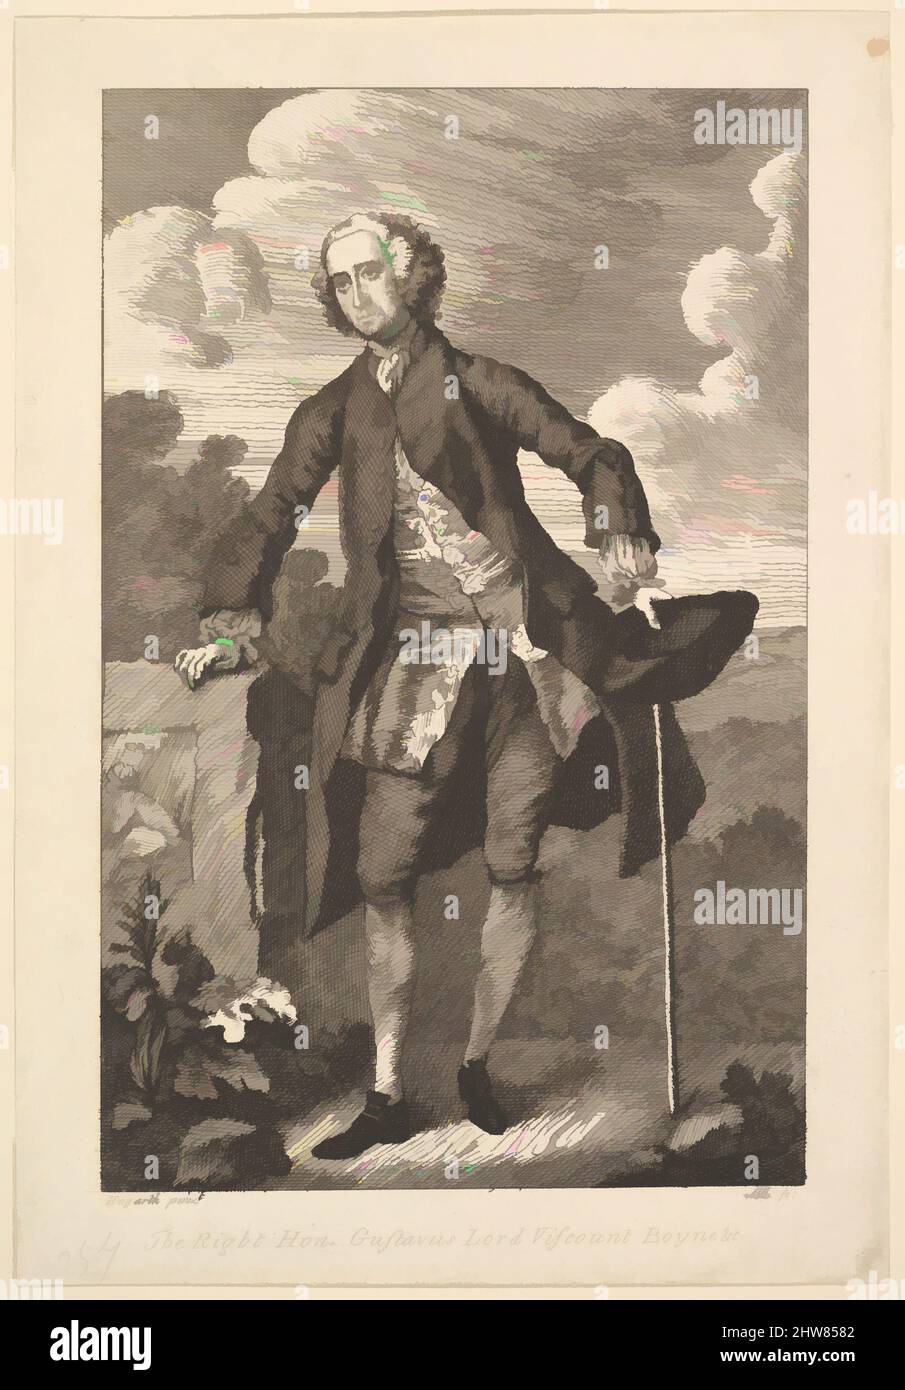 Art inspired by The Right Hon. Gustavus Lord Viscount Boyne &c., 1794 (?), Etching, Sheet: 9 7/16 x 6 7/16 in. (23.9 x 16.4 cm), Prints, After William Hogarth (British, London 1697–1764 London, Classic works modernized by Artotop with a splash of modernity. Shapes, color and value, eye-catching visual impact on art. Emotions through freedom of artworks in a contemporary way. A timeless message pursuing a wildly creative new direction. Artists turning to the digital medium and creating the Artotop NFT Stock Photo